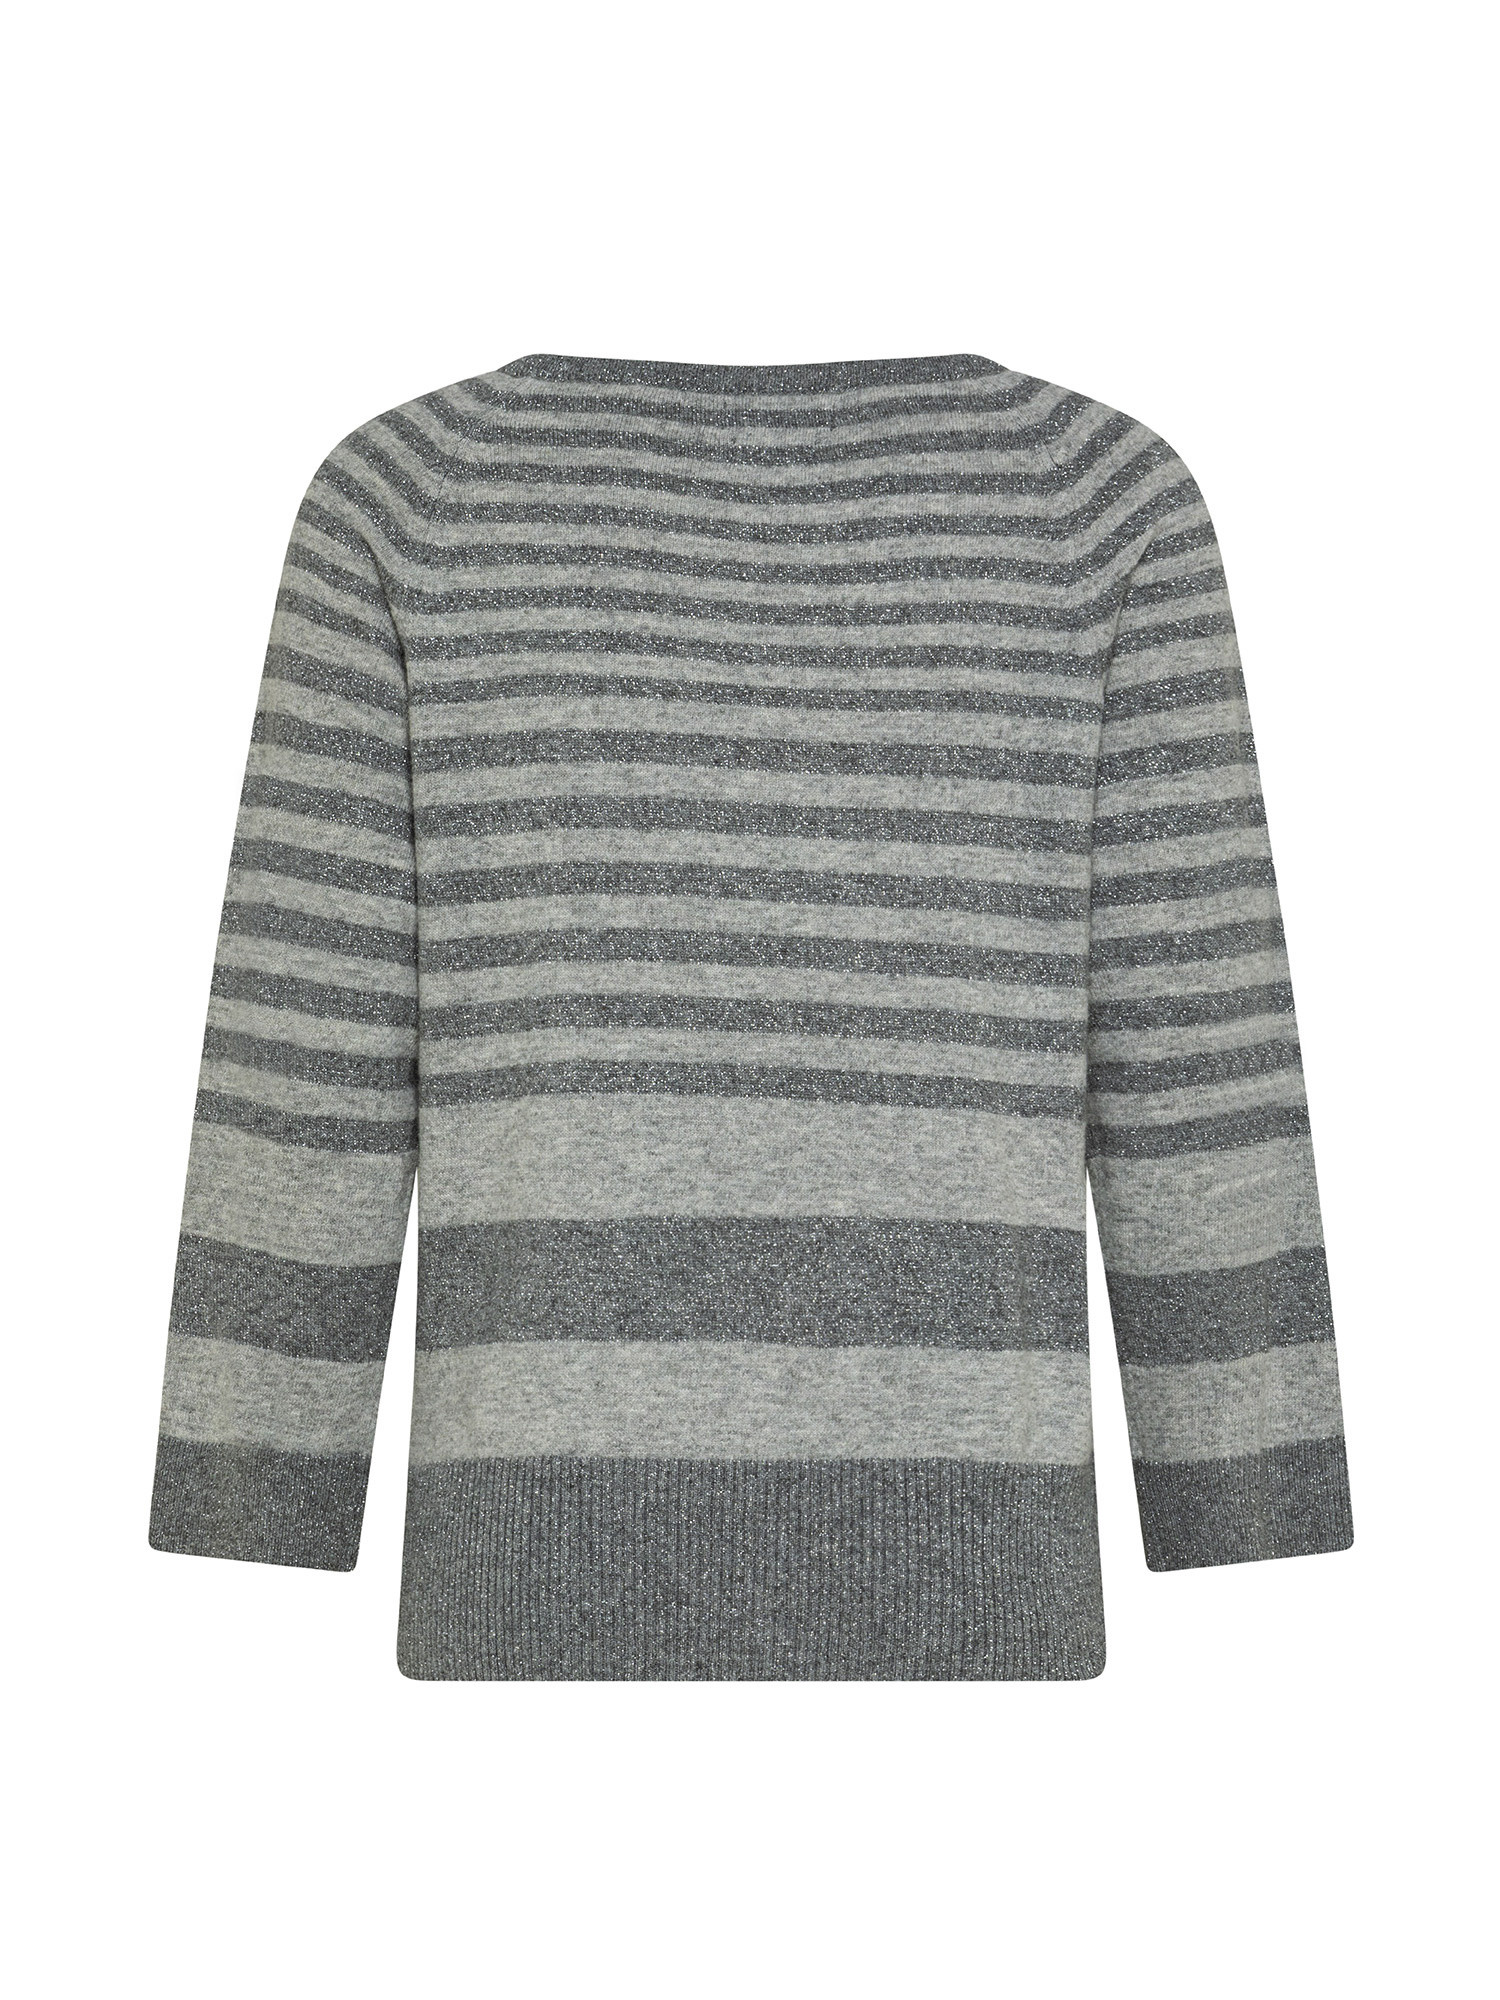 Koan - Striped sweater with slits, Grey, large image number 1